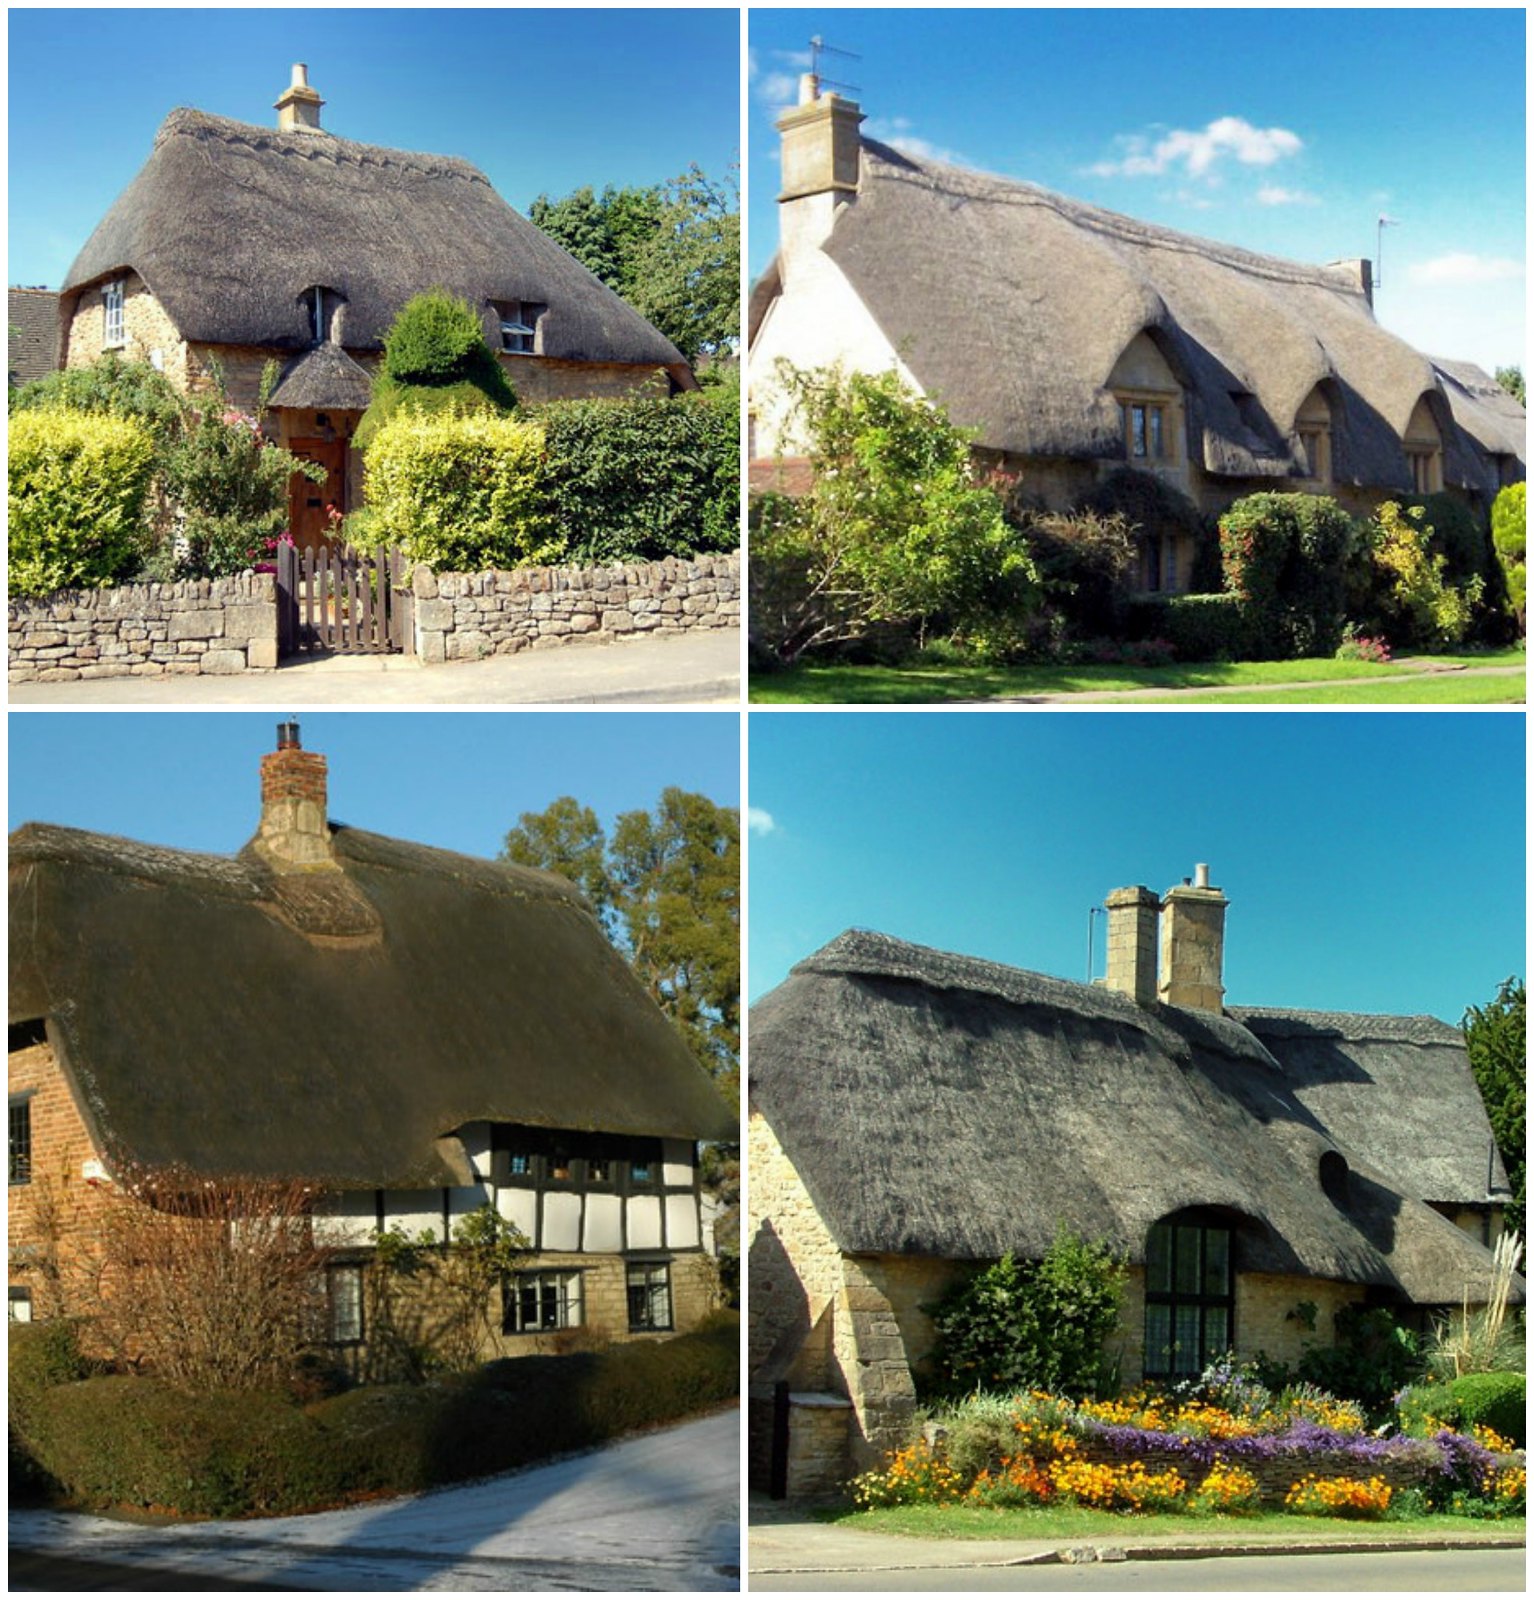 Thatched Cottages in Gloucester